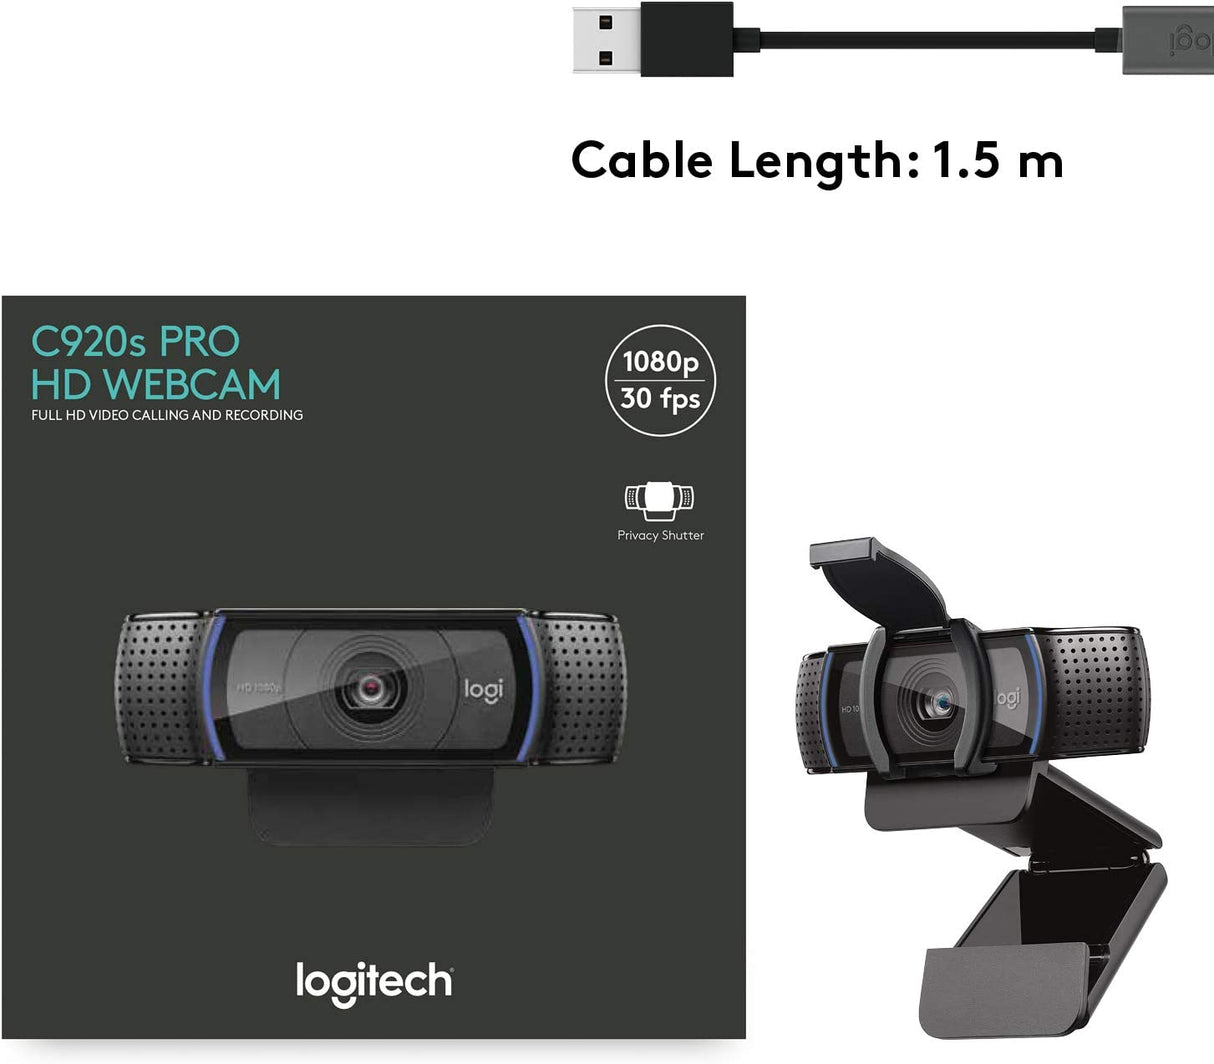 Logitech C920s HD Pro Webcam, Full HD 1080p/30fps Video Calling, Clear  Stereo Audio, HD Light Correction, Works with Skype, Zoom, FaceTime,  Hangouts, PC/Mac/Laptop/Macbook/Tablet - Black 